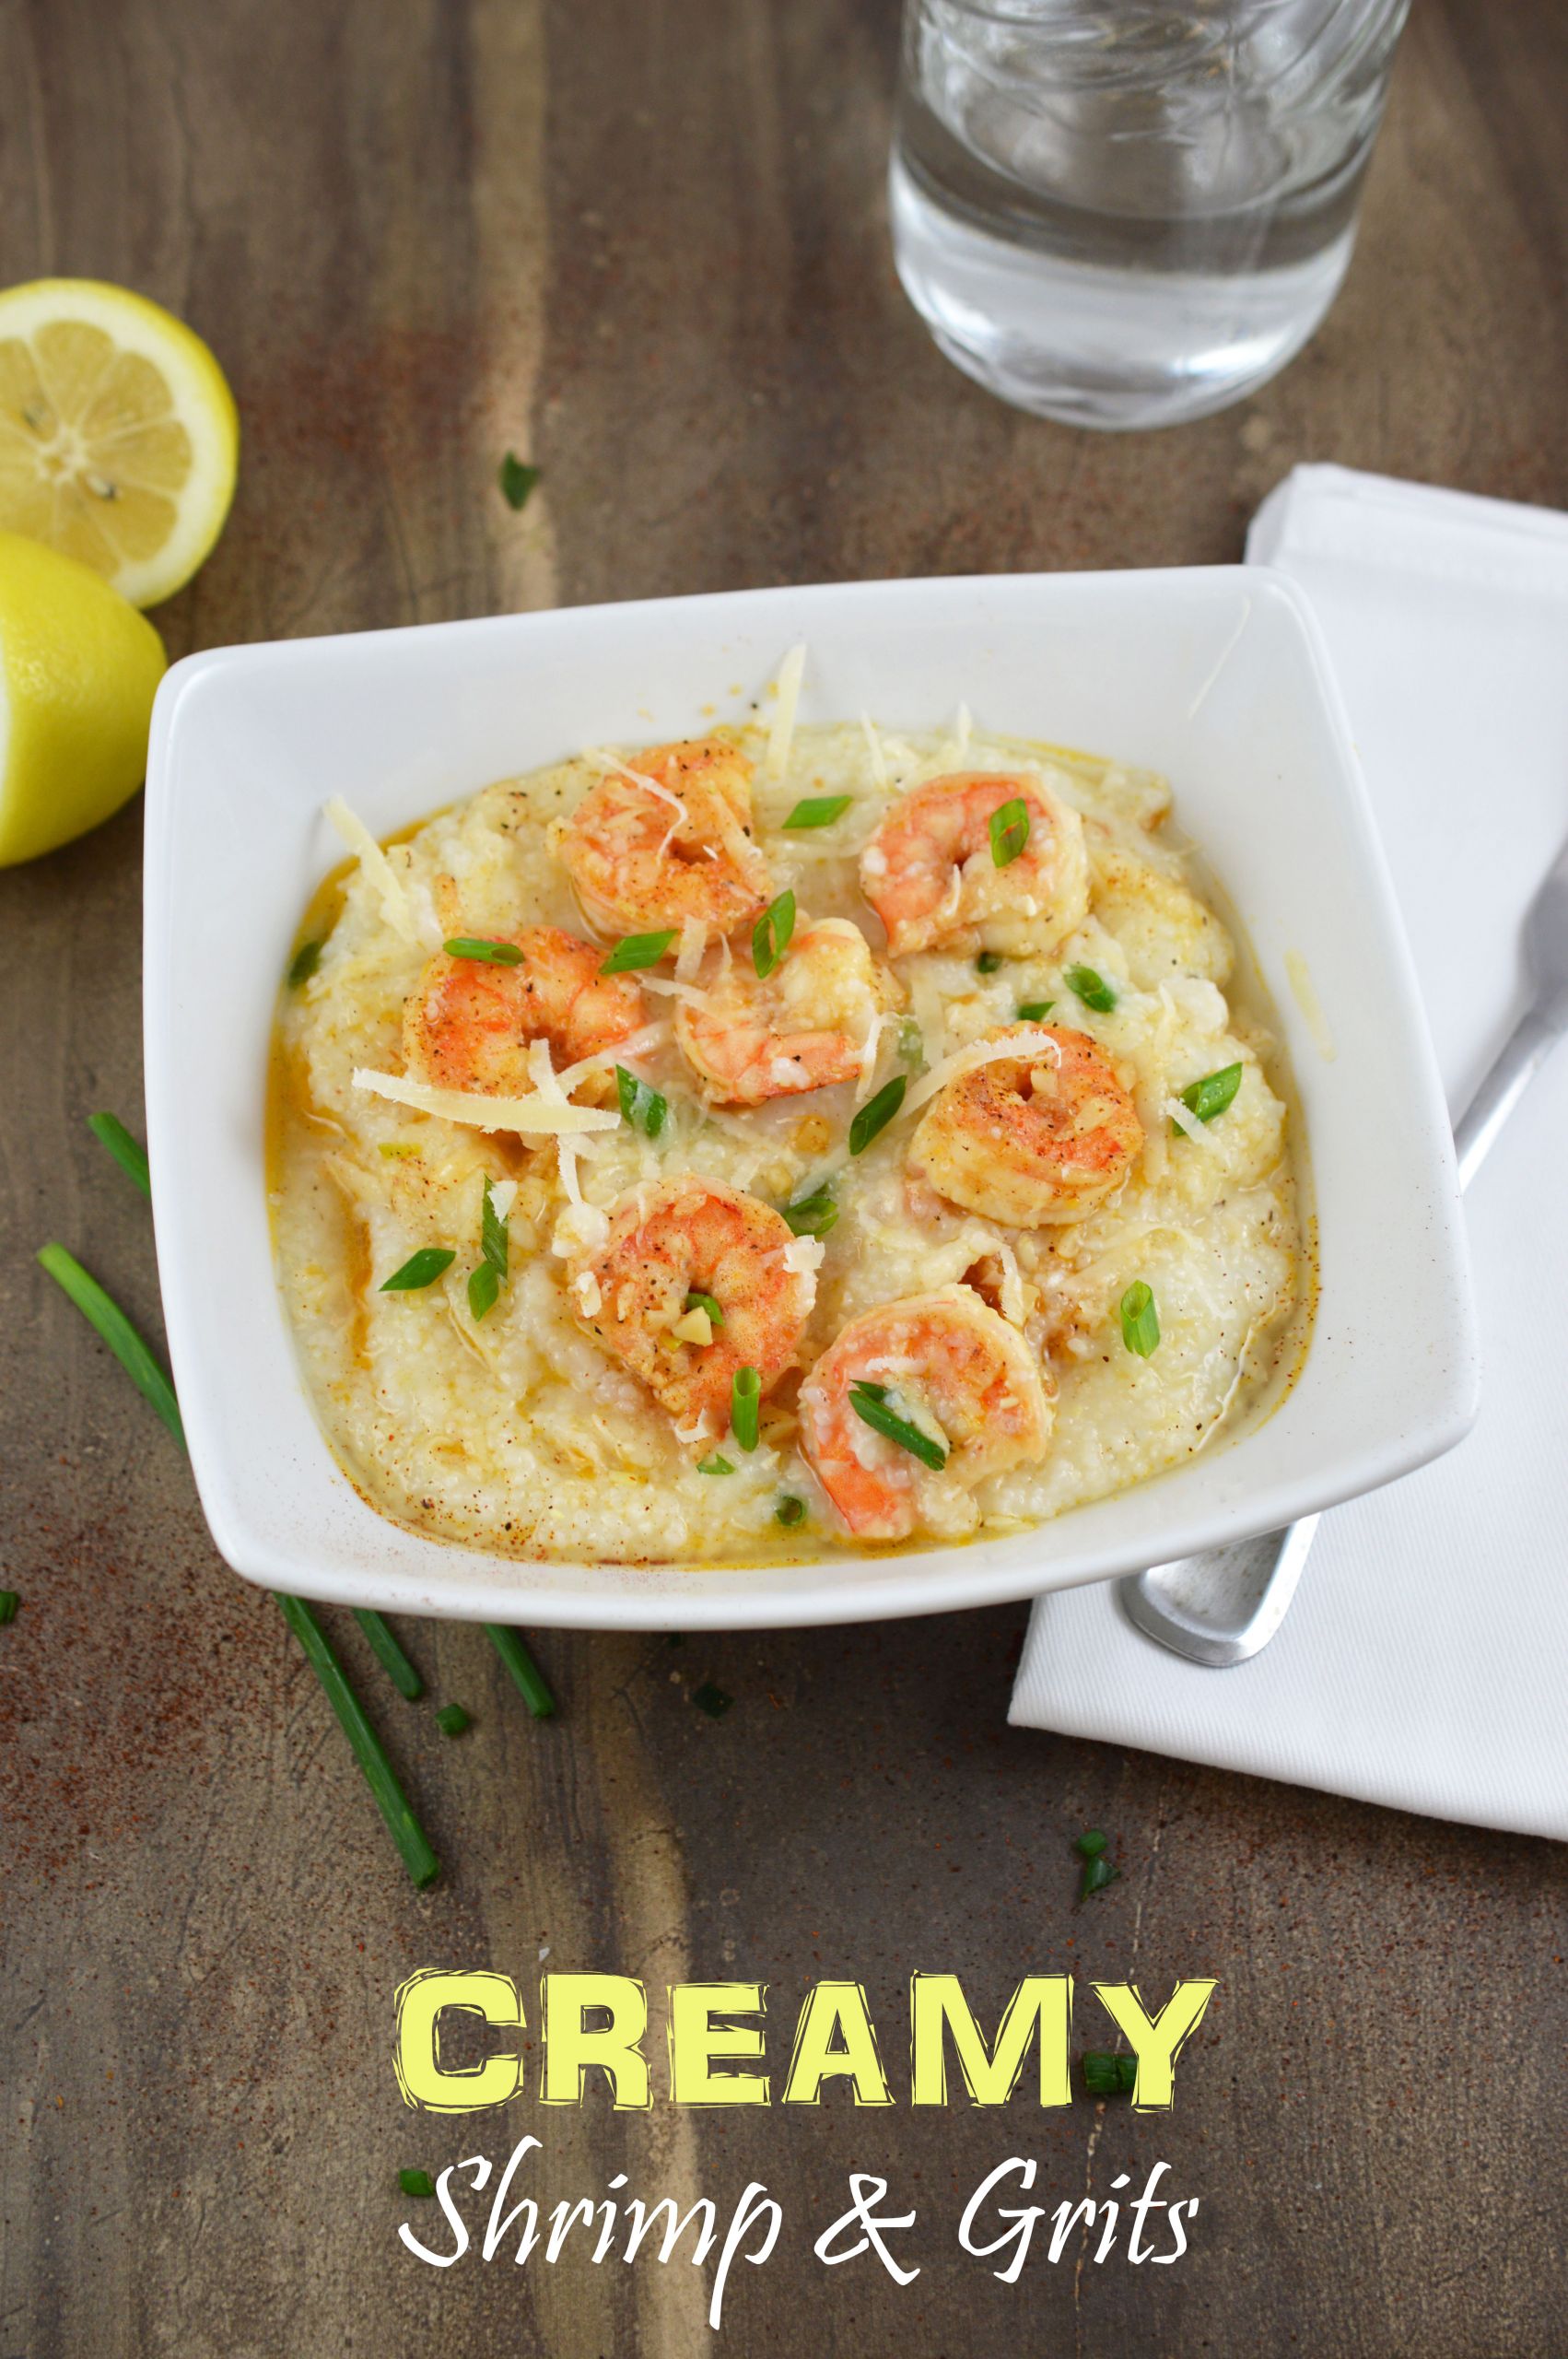 The Best Shrimp And Grits Recipe
 Creamy Shrimp & Grits Chef Savvy